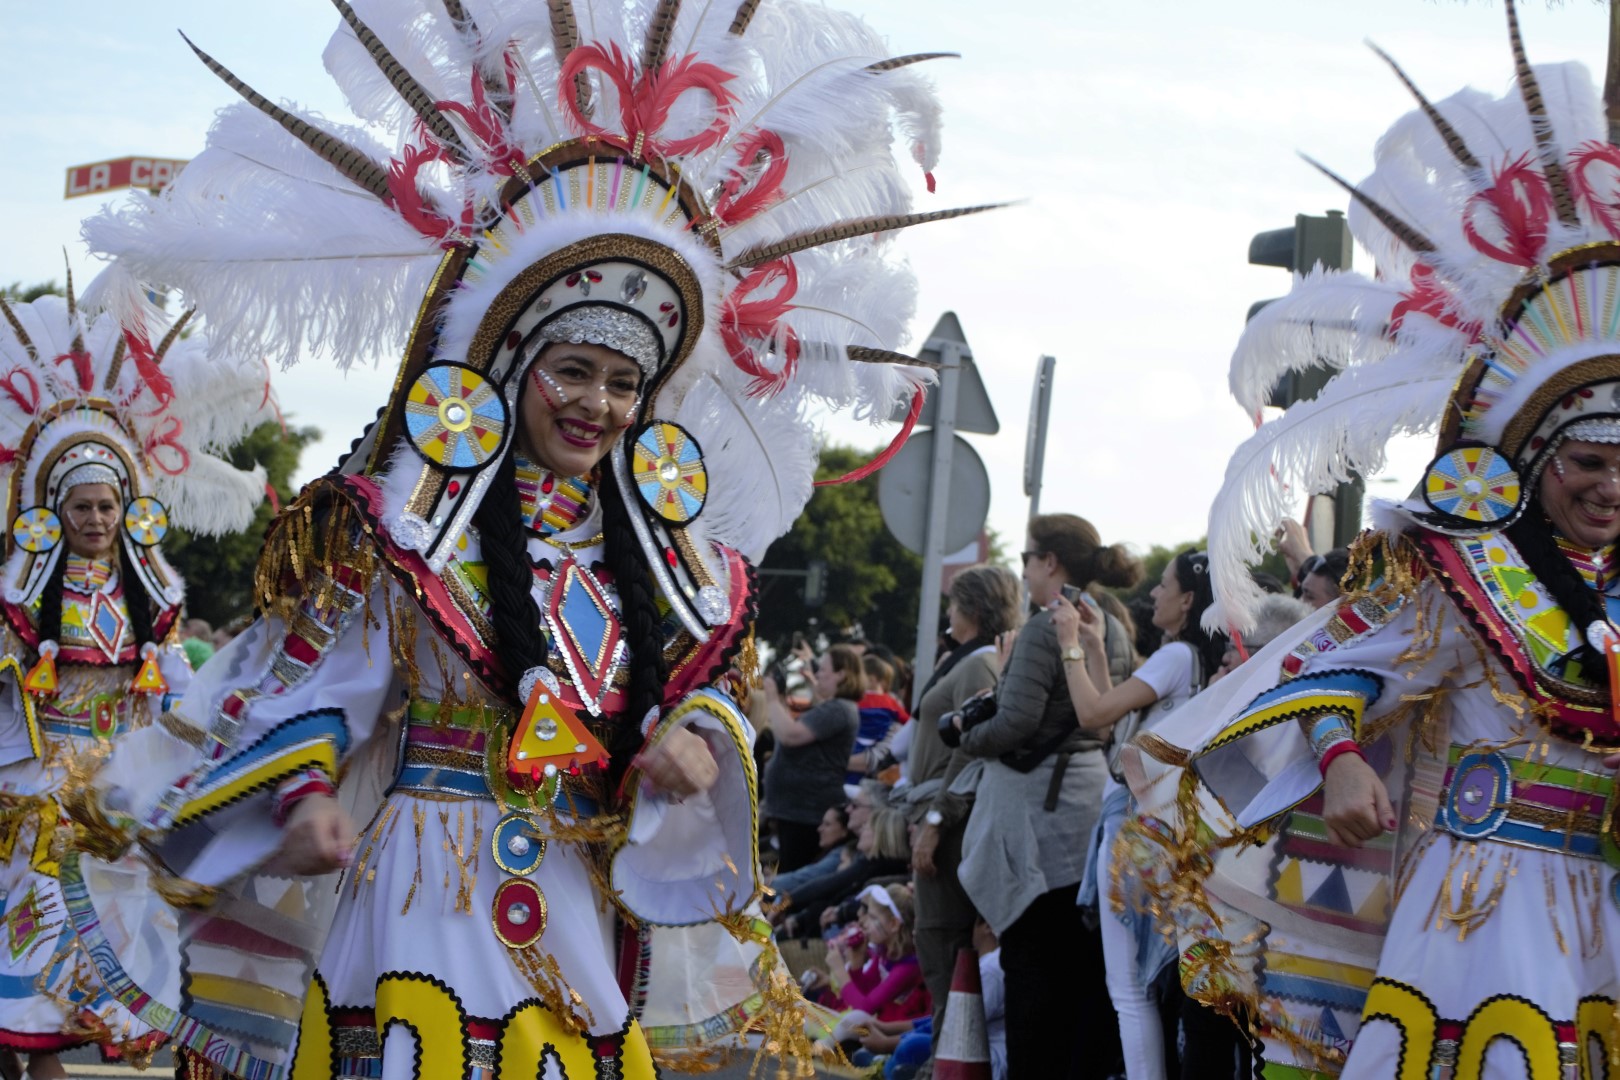 The history of Carnival in Tenerife